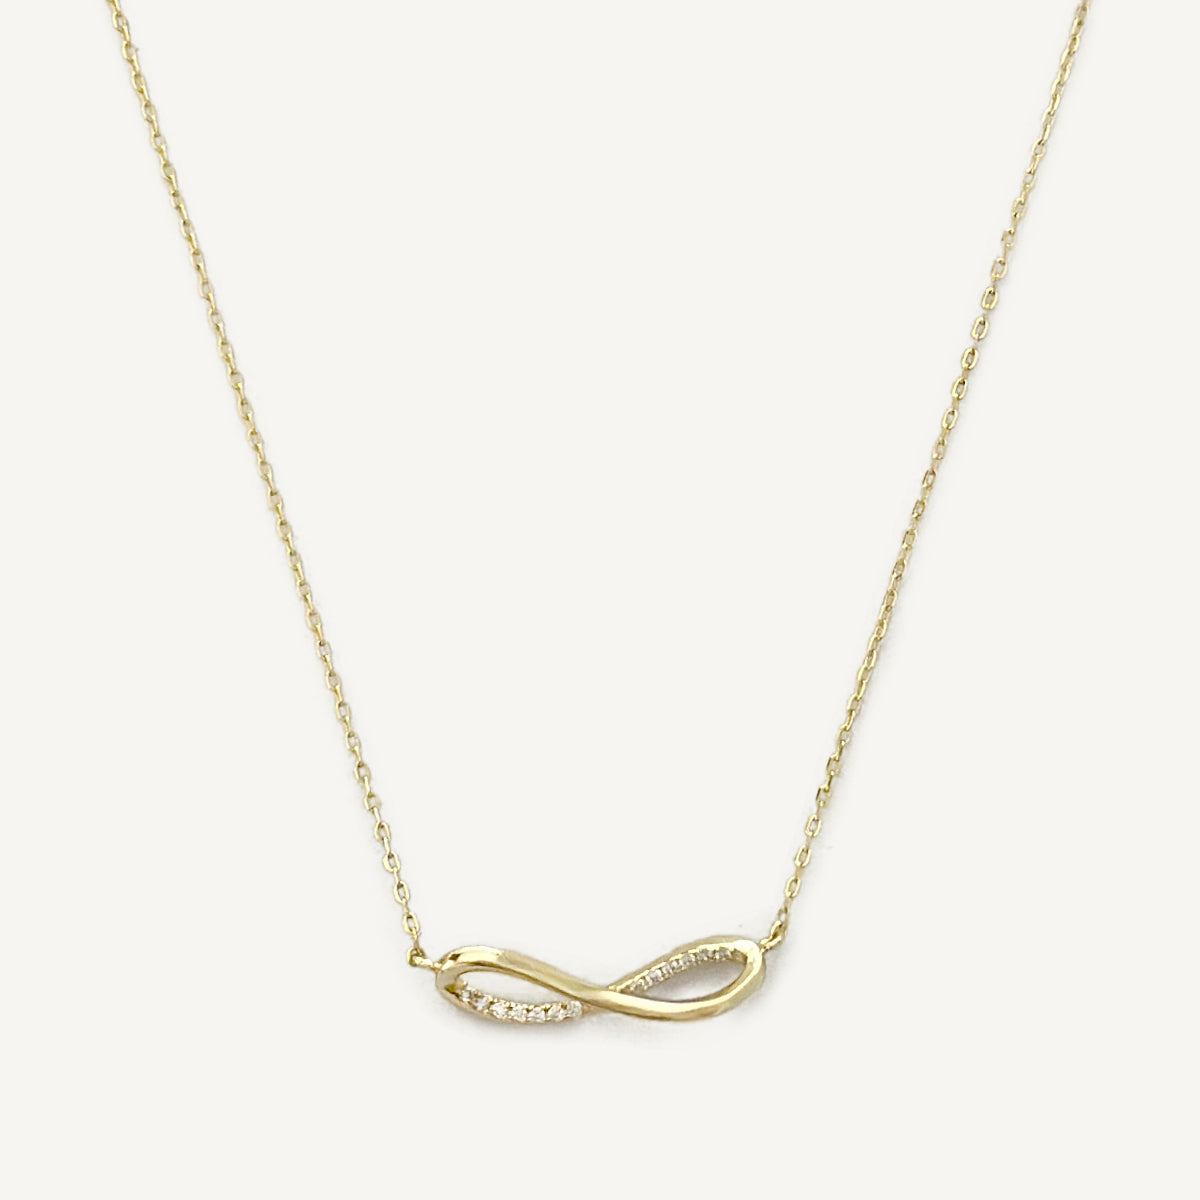 The Infinity Promise Necklace